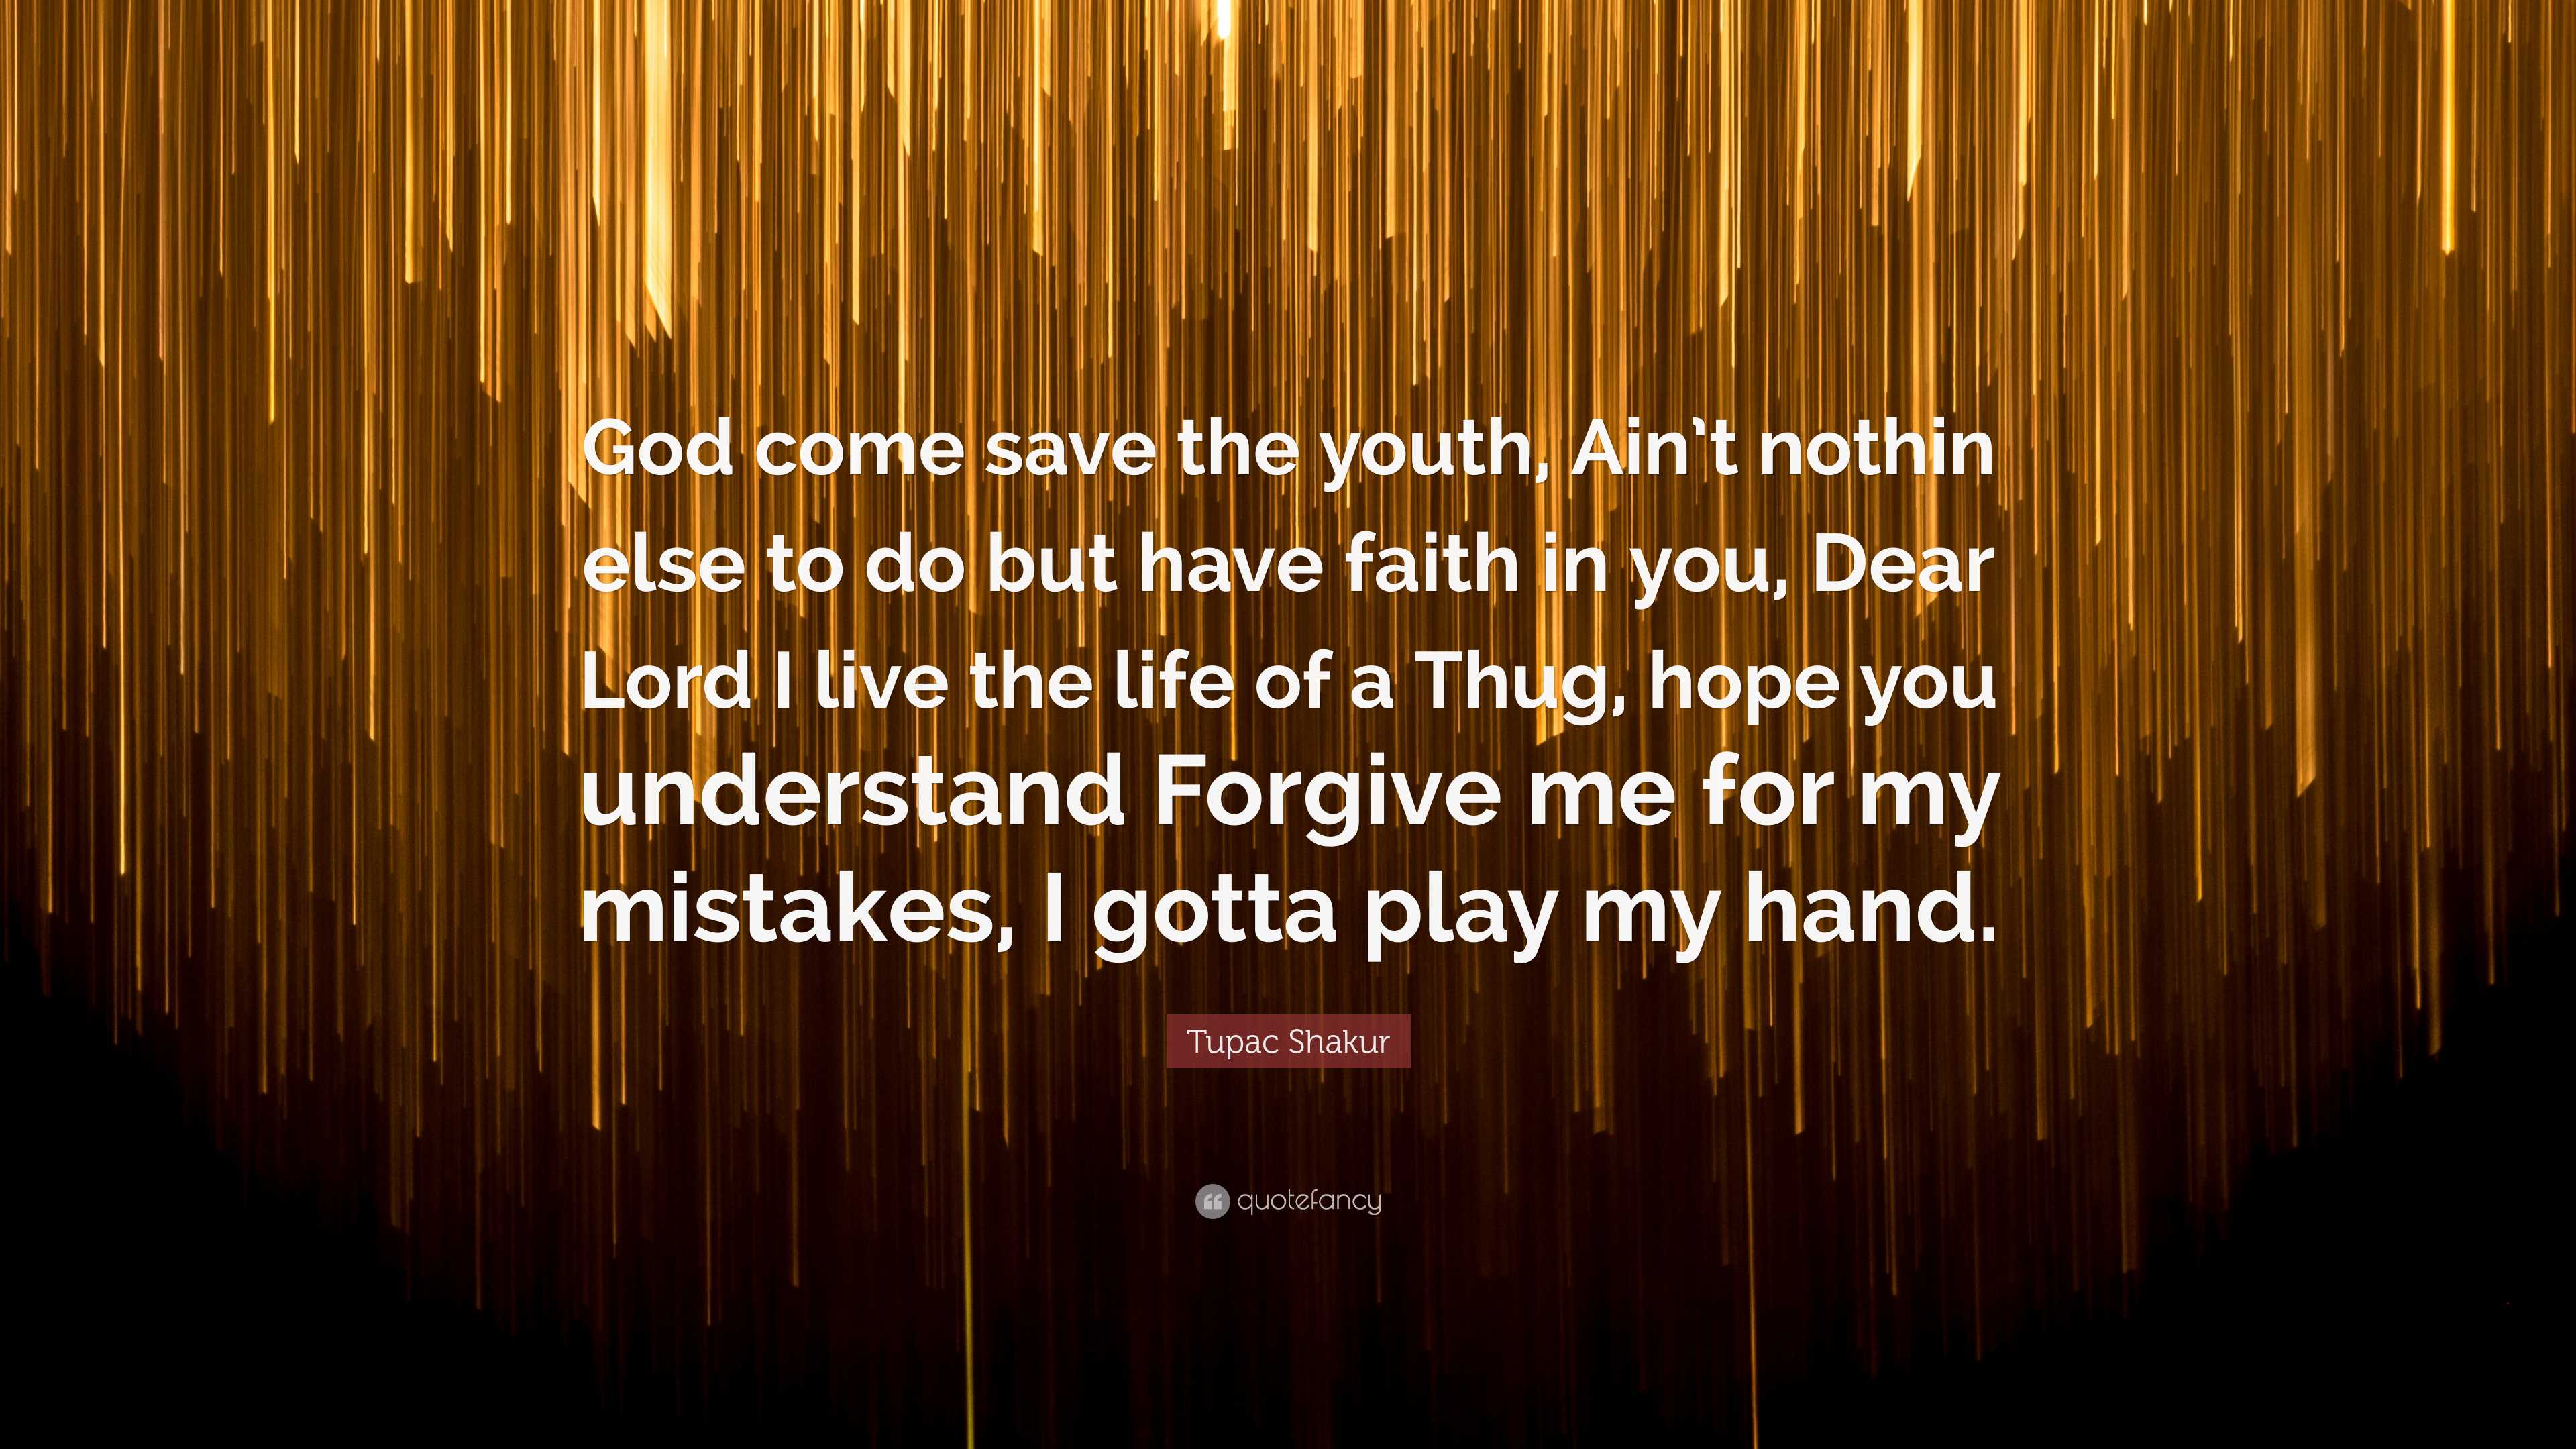 Tupac Shakur Quote: “God come save the youth, Ain't nothin else to